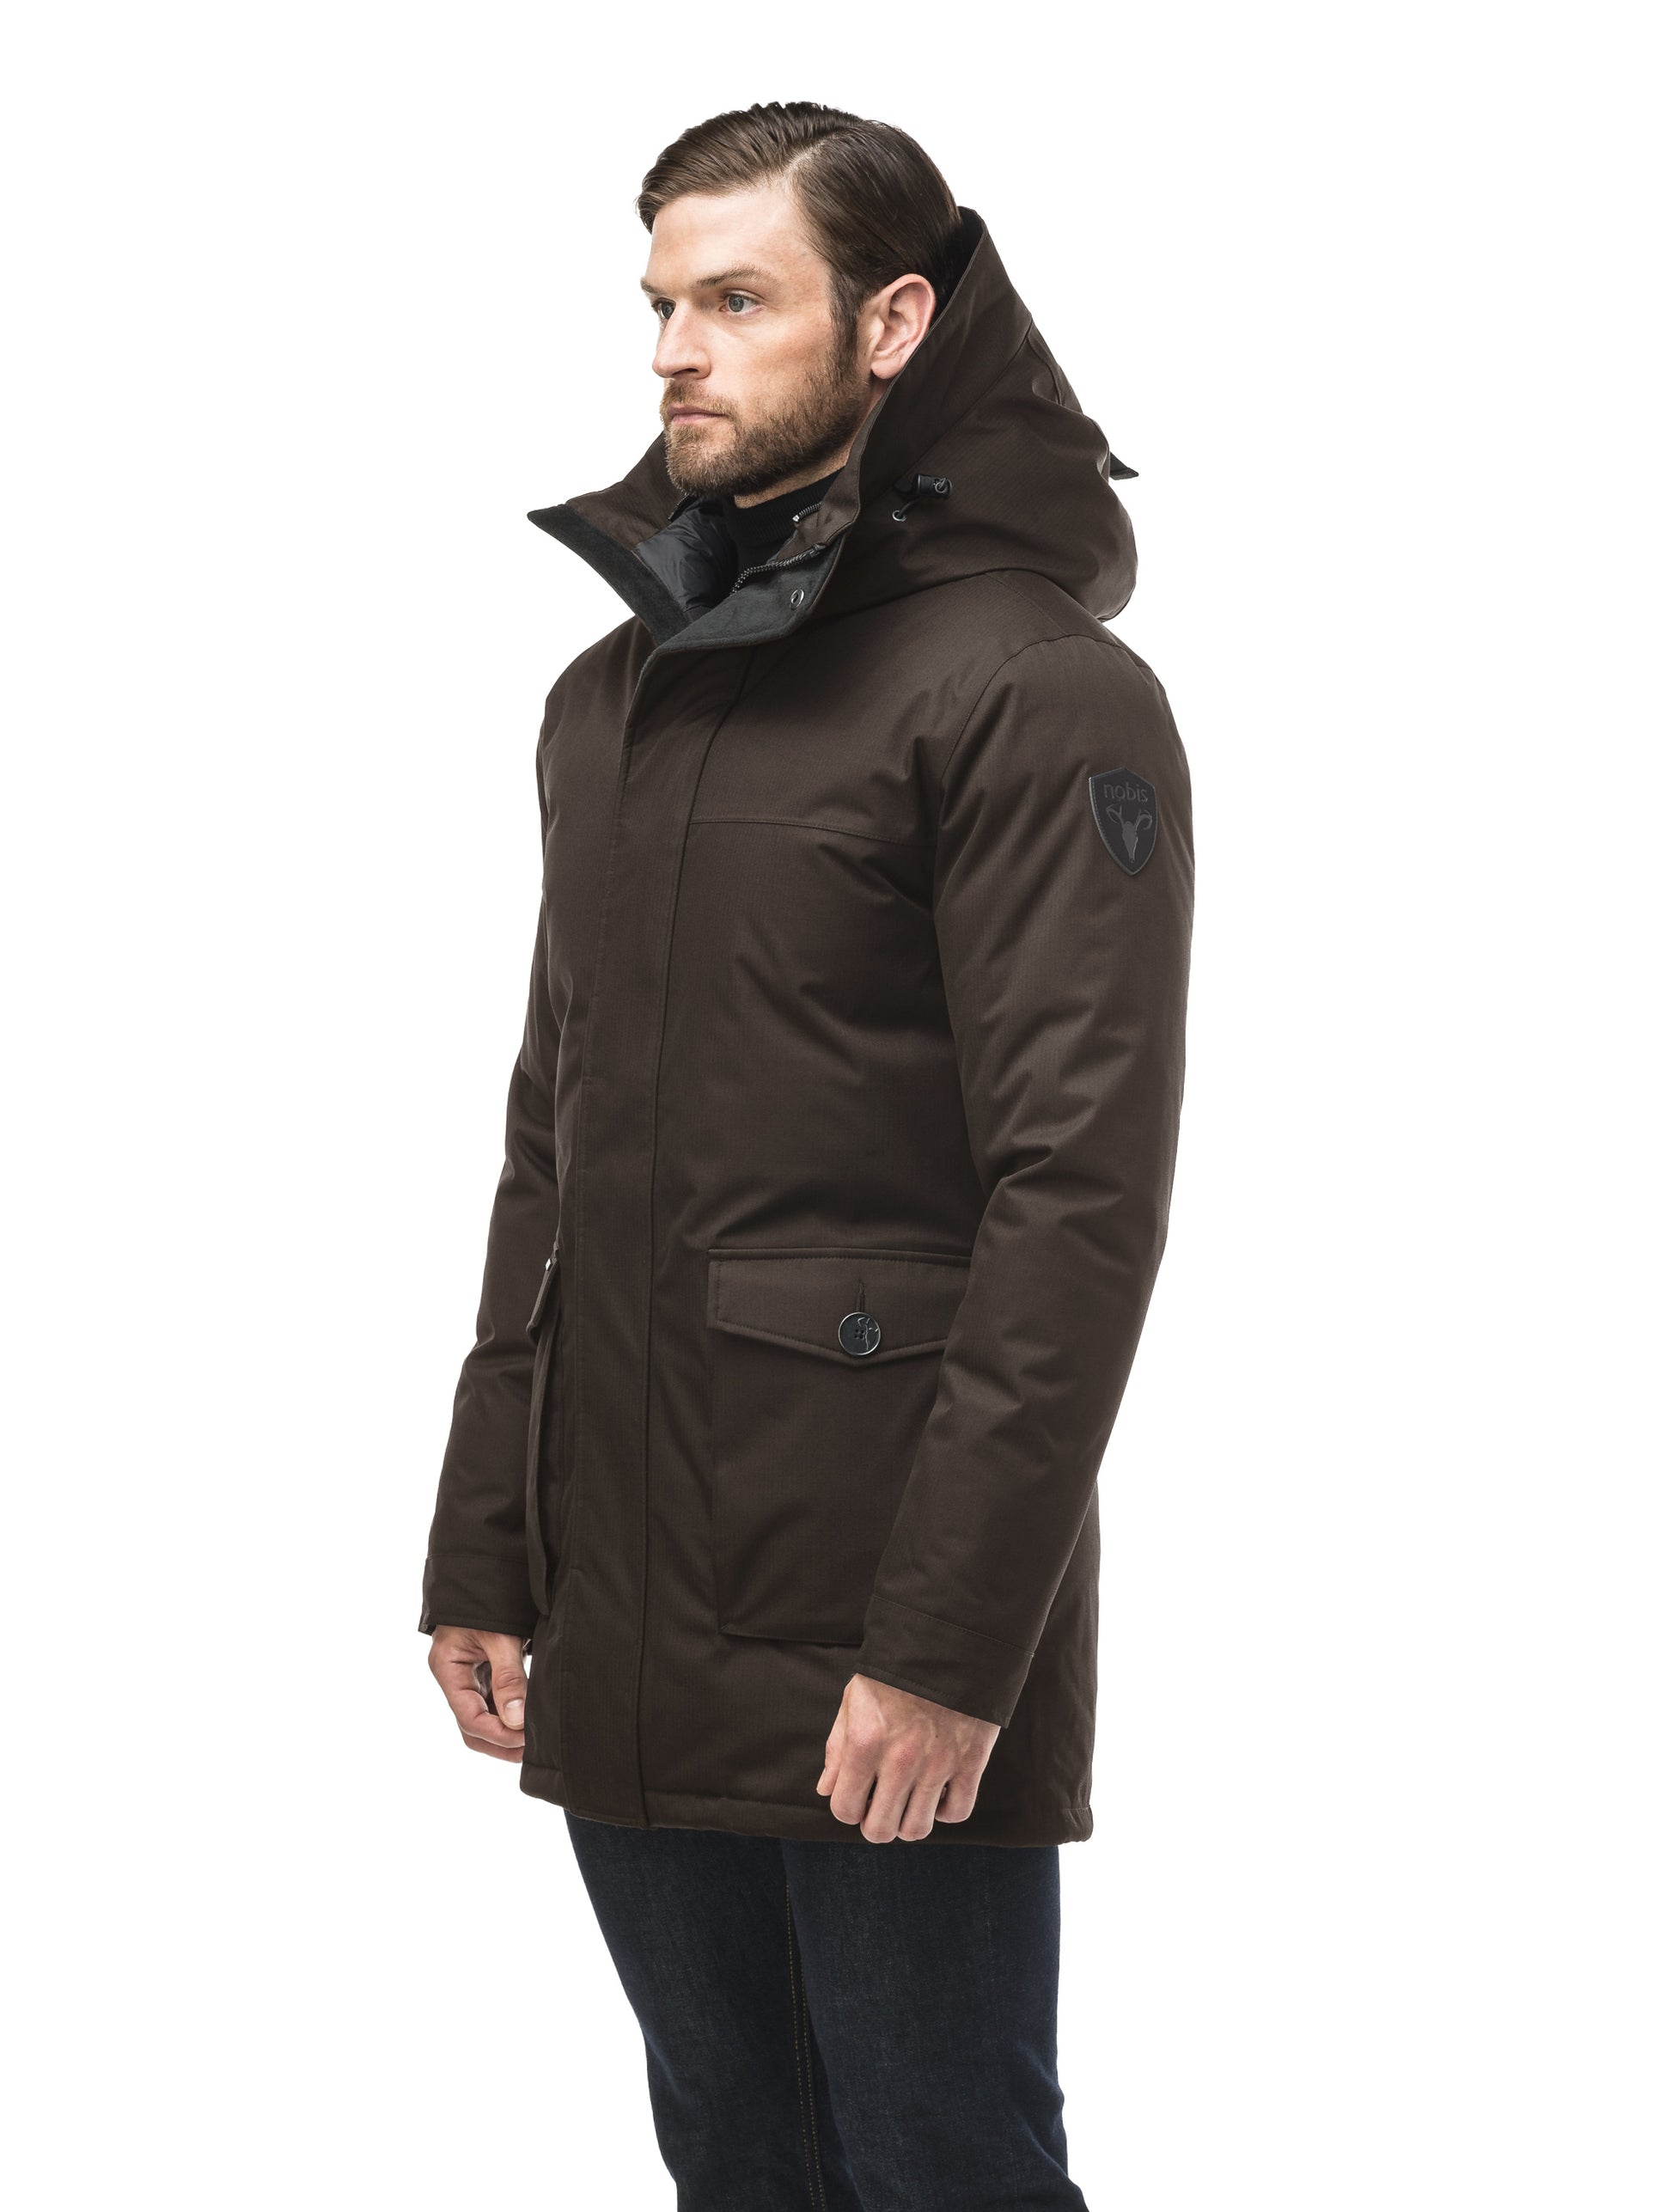 Men's slim fitting waist length parka with removable fur trim on the hood and two waist patch pockets in CH Brown